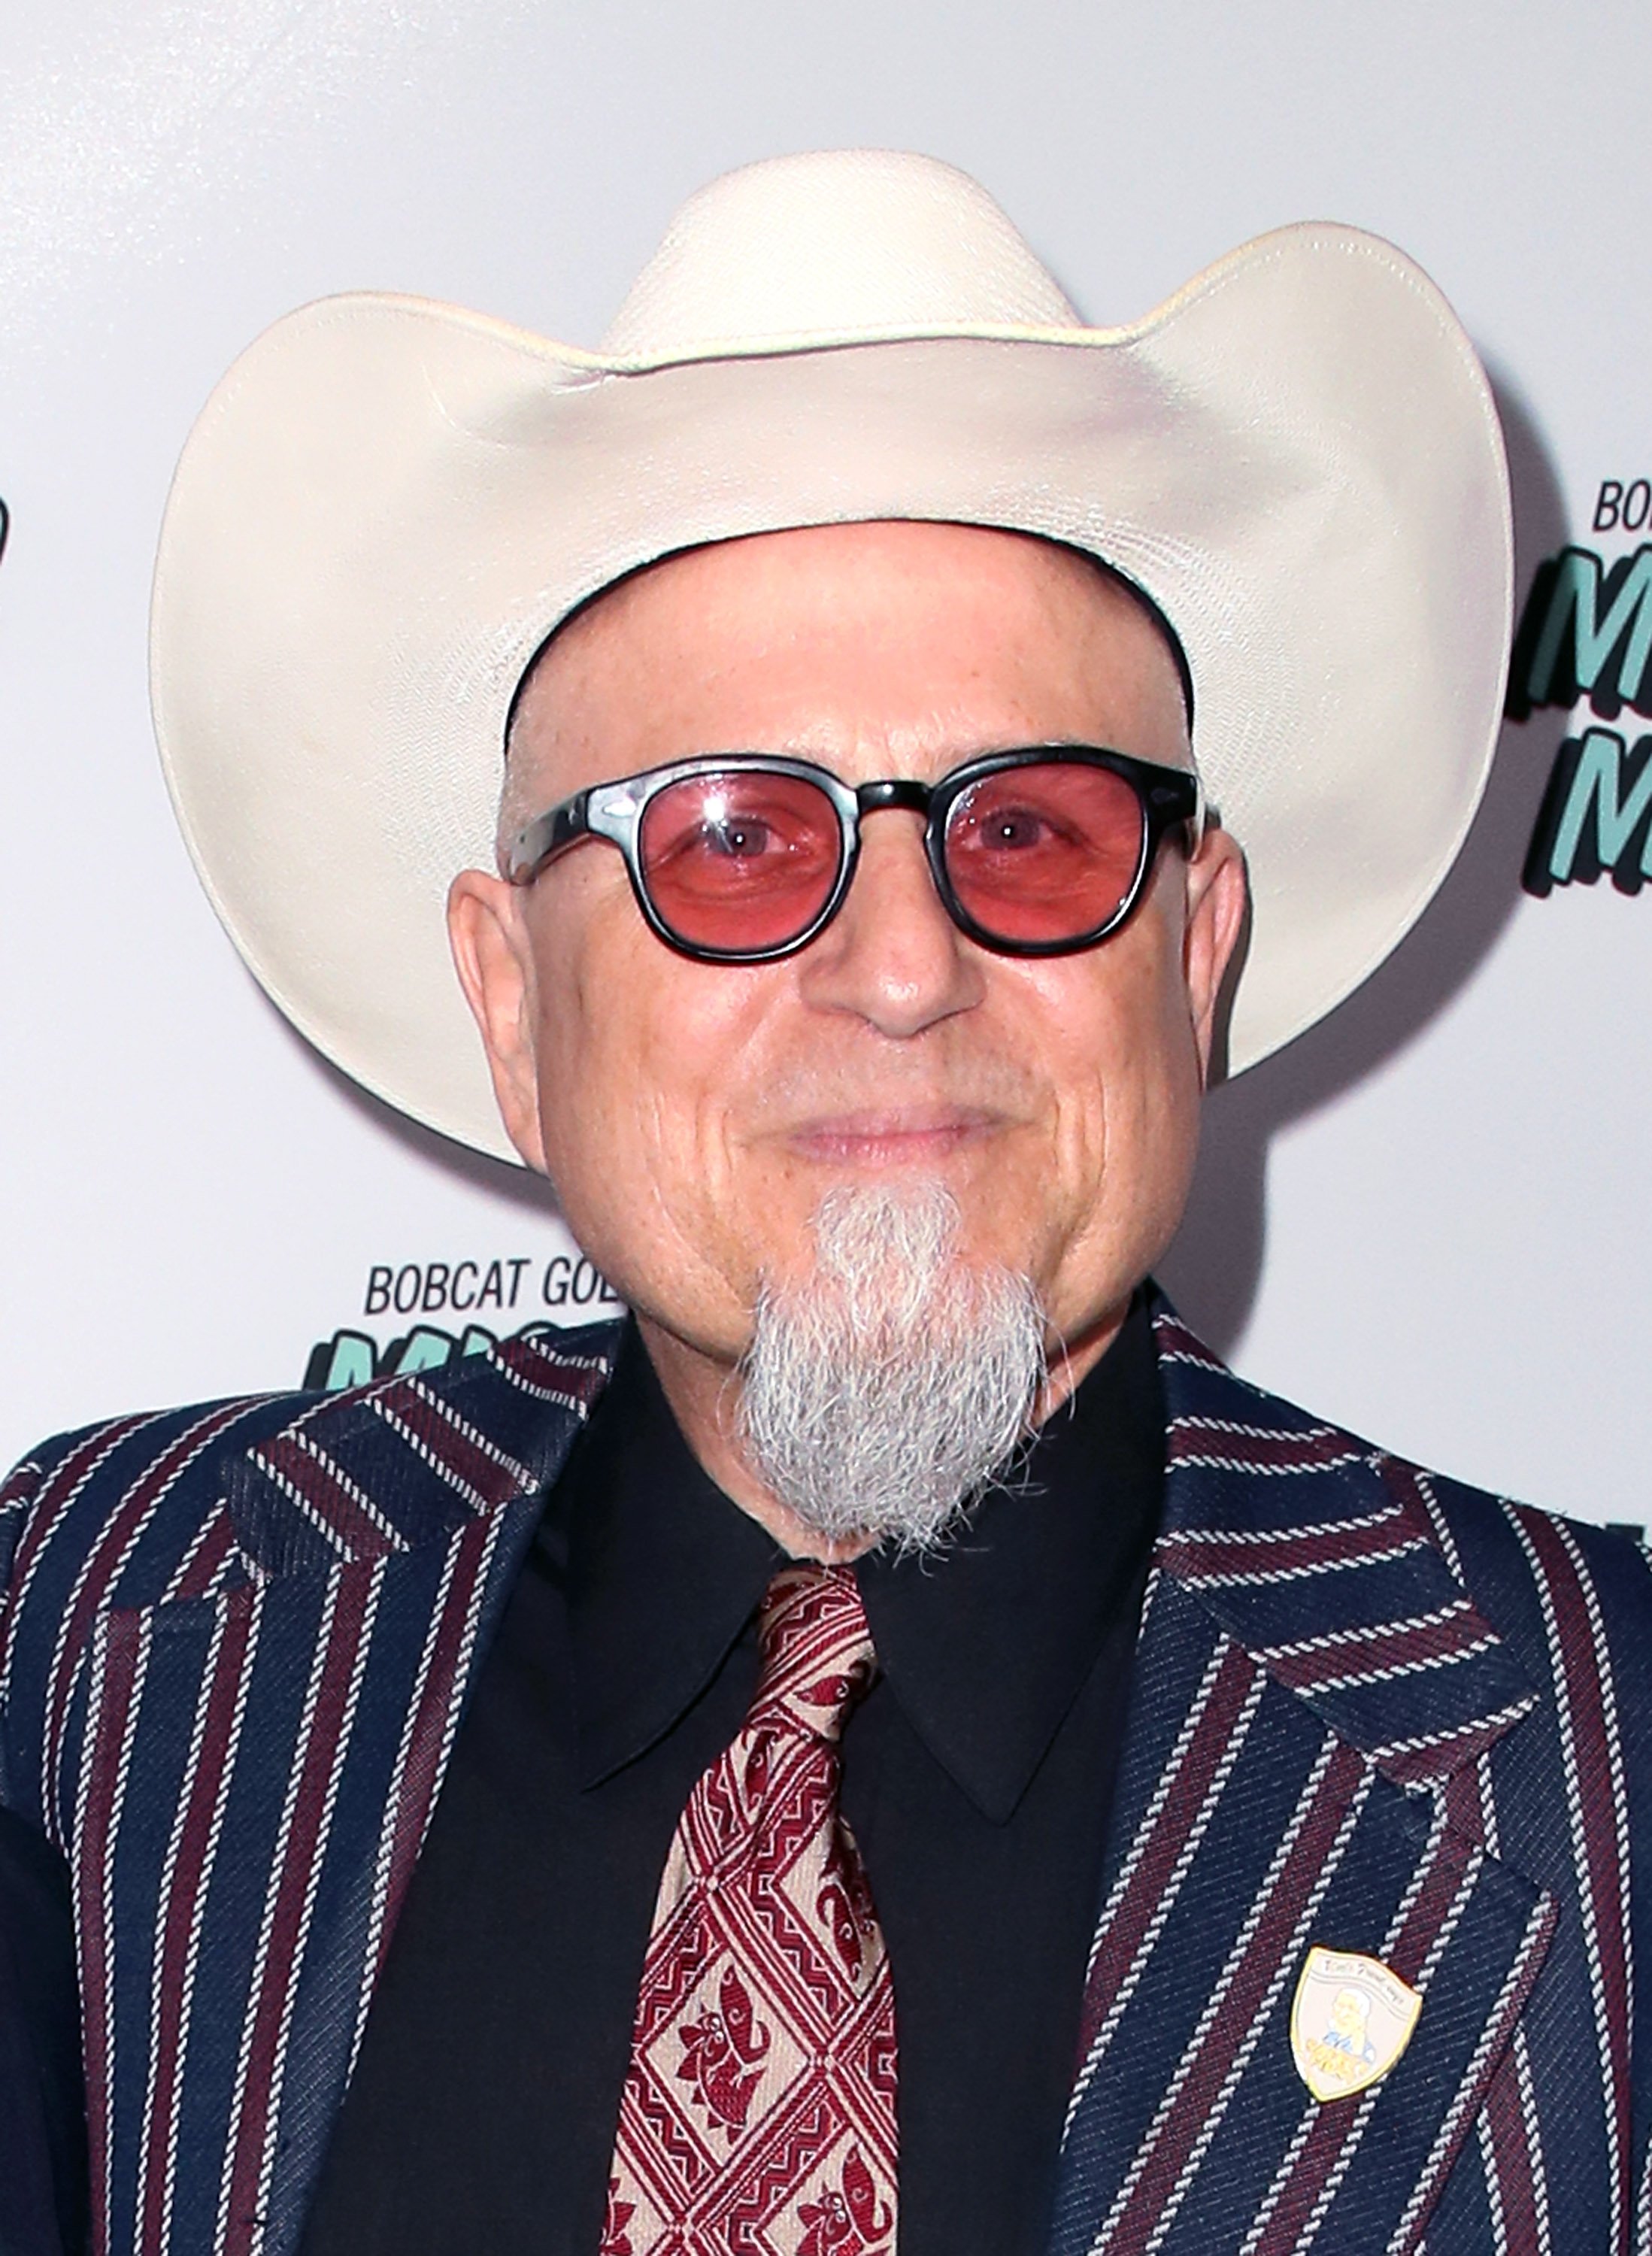 Bobcat Goldthwait attends the premiere of truTV's "Bobcat Goldthwait's Misfits & Monsters" at the Hollywood Roosevelt Hotel on July 11, 2018 in Hollywood, California | Source: Getty Images